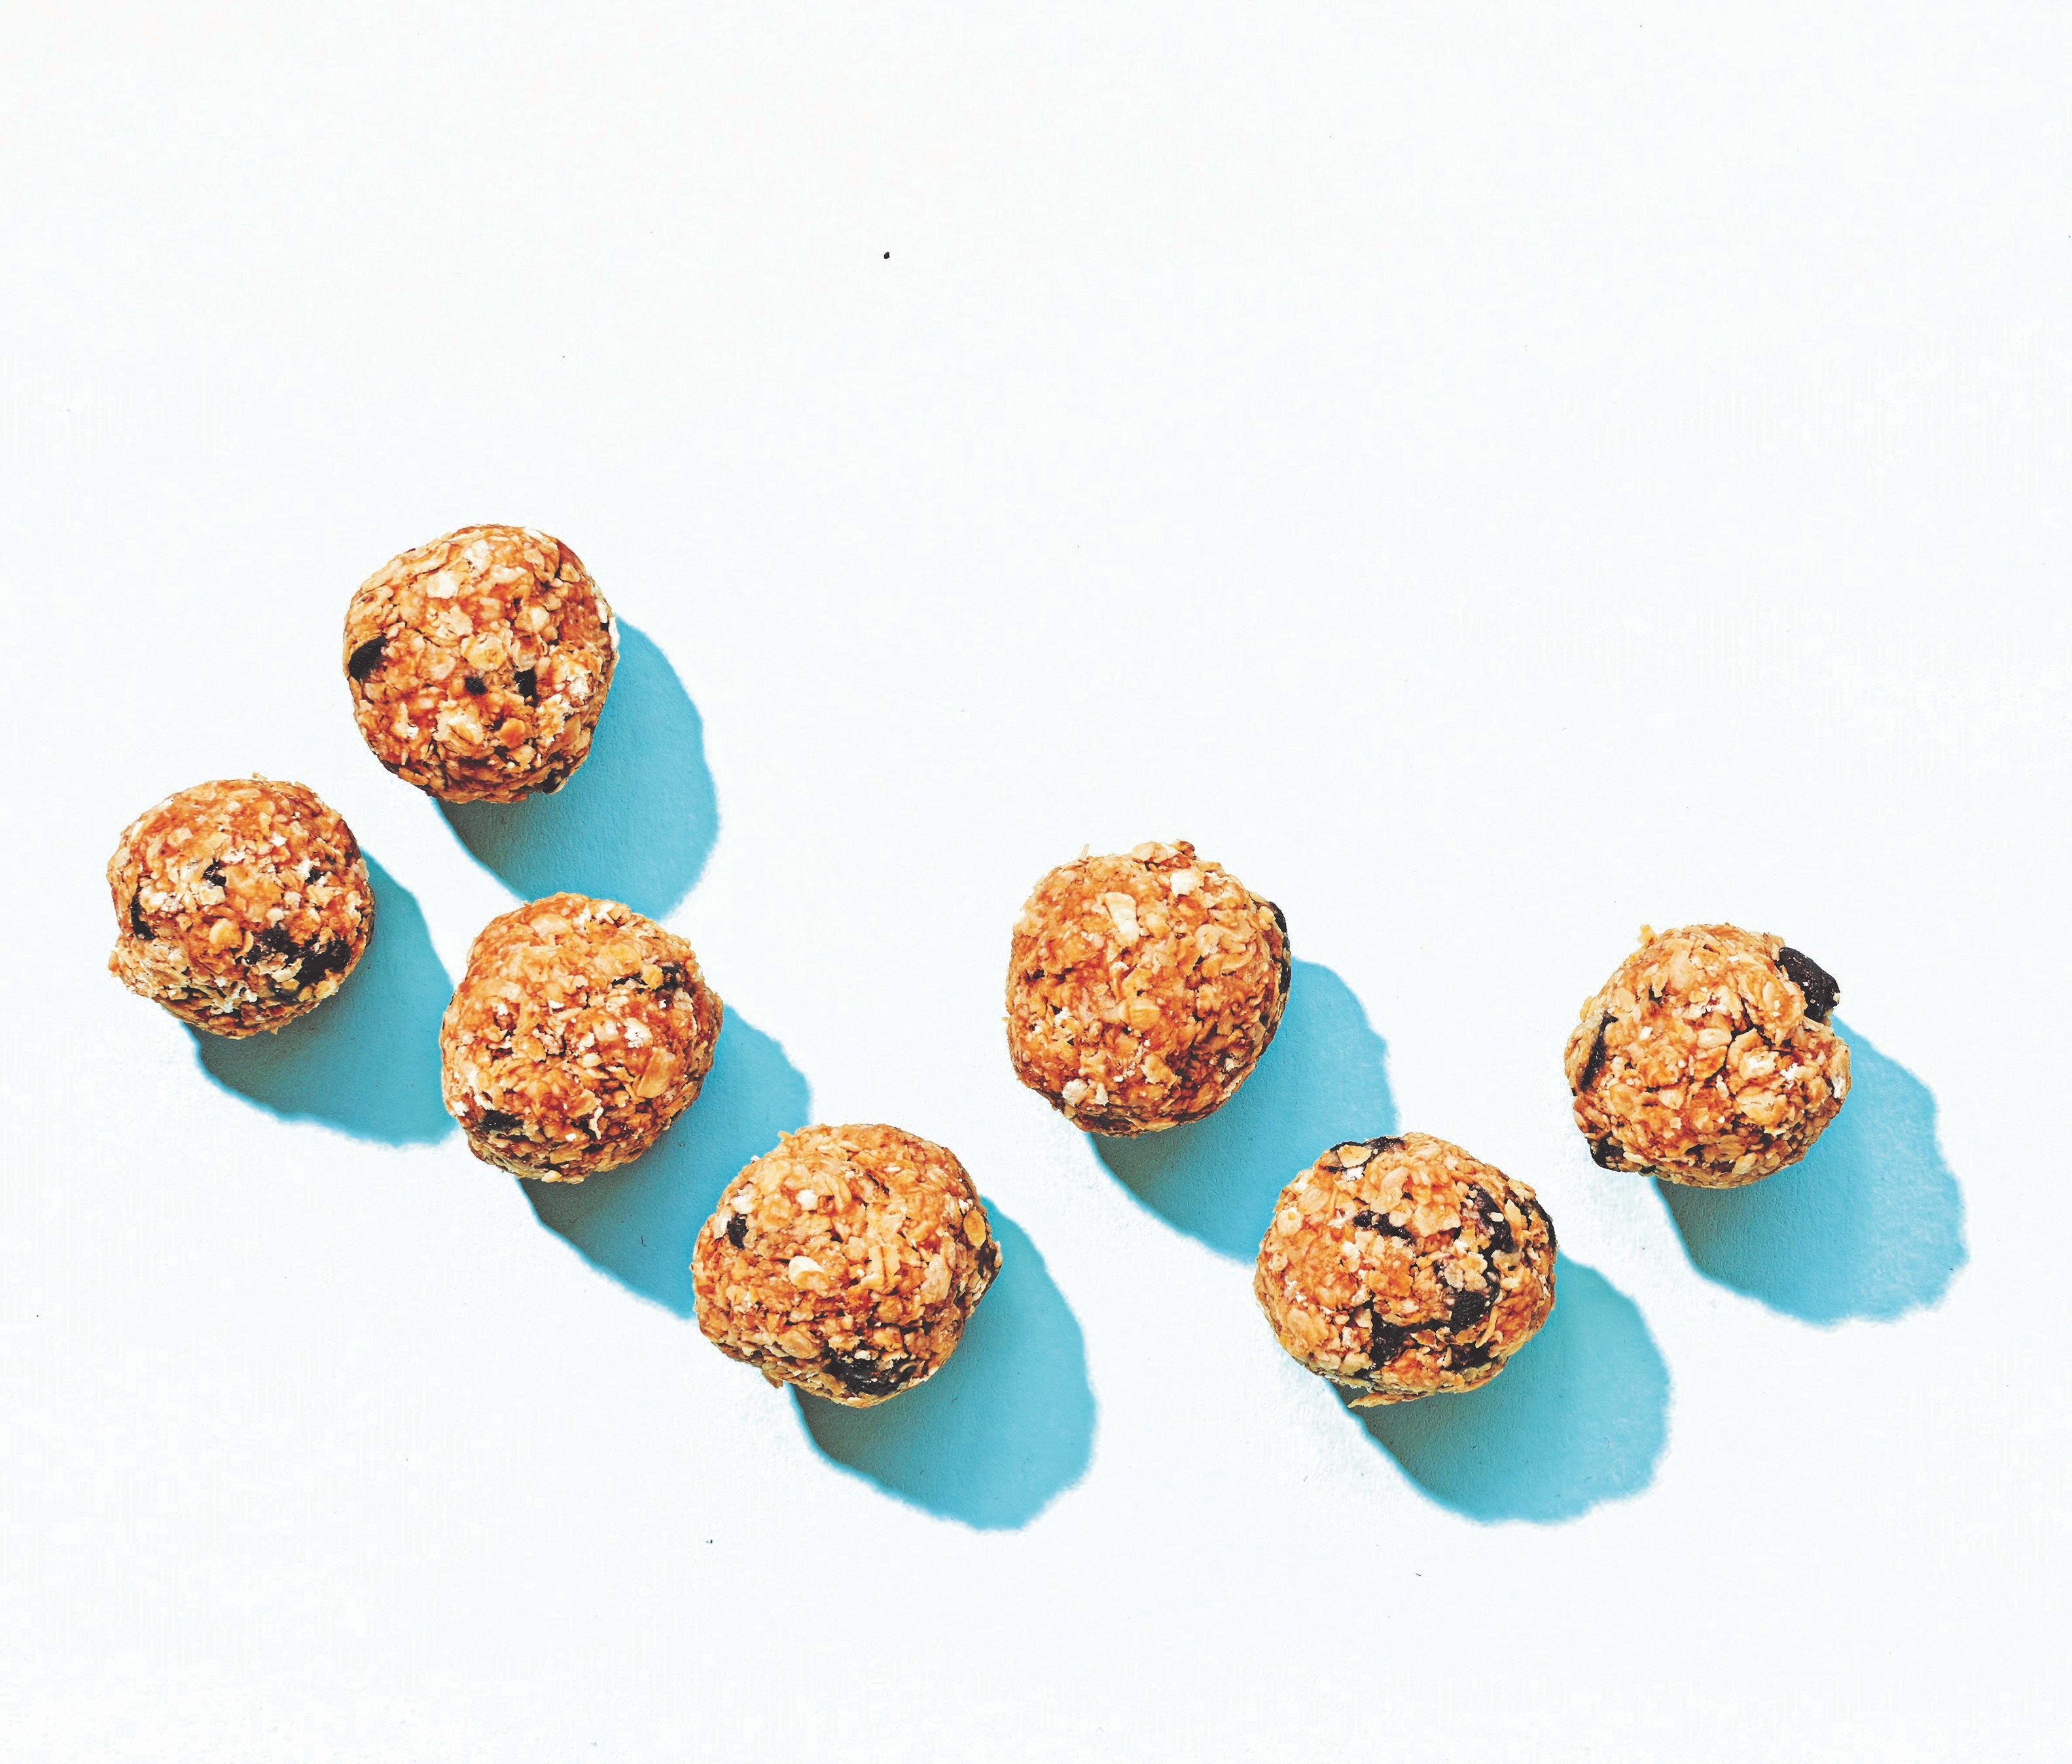 Photo of Chocolate & peanut butter snack balls by WW